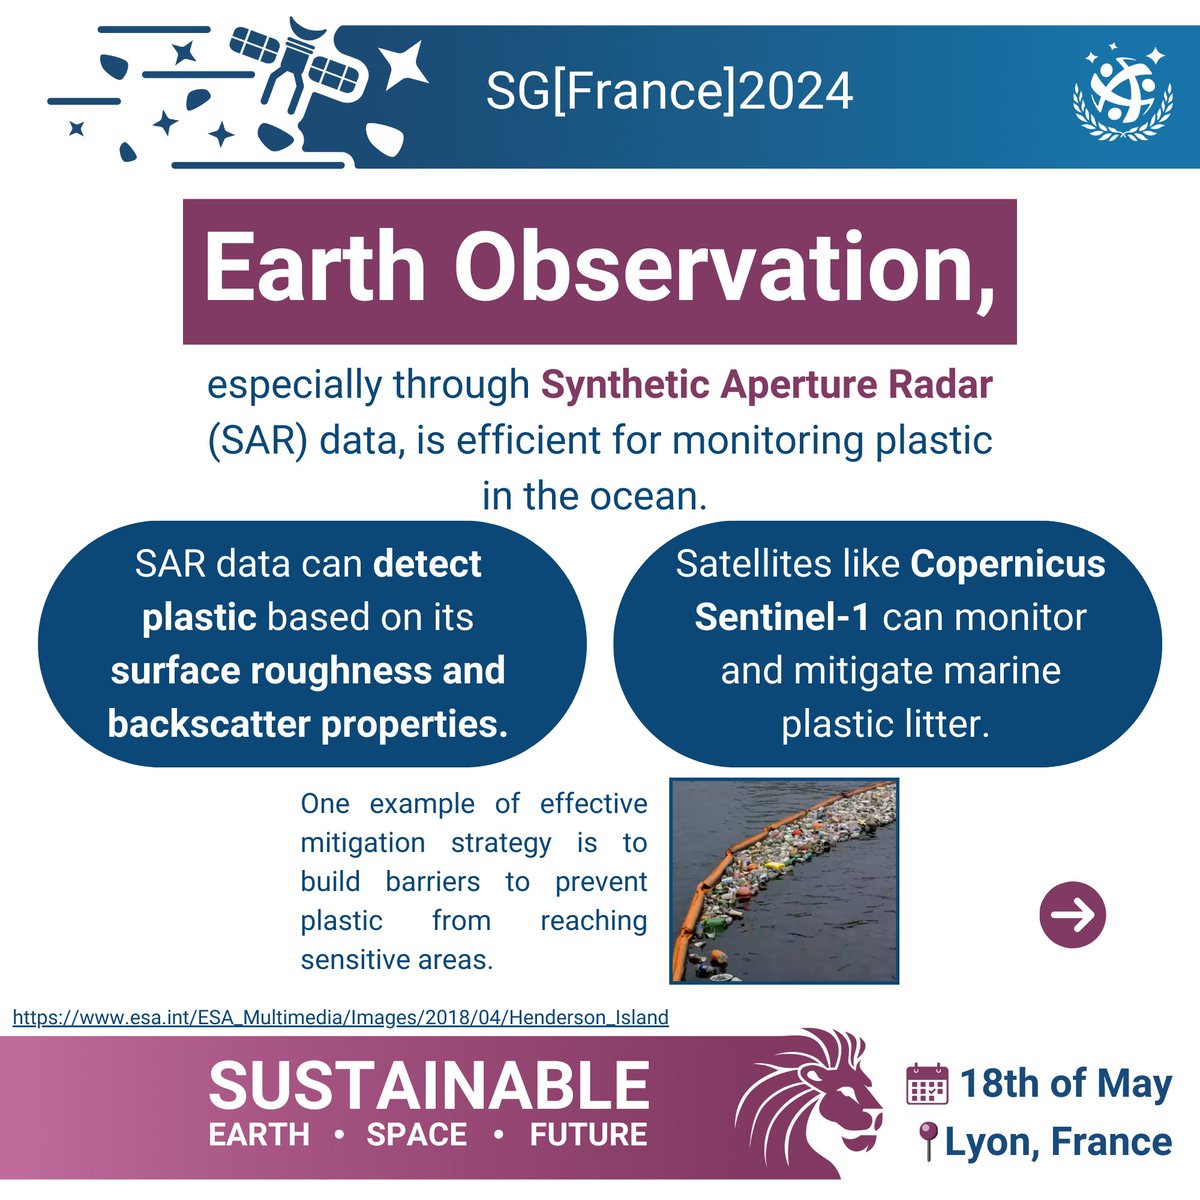 🌍 Today is #EarthDay 🌍Let's explore solutions for combating plastic pollution together! ✨Join us in shaping a sustainable future for Earth and Space at SG[France] 2024 in Lyon, France, 18th of May! 🌟 Visit our website: spacegeneration.org/sgfrance-2024-… #SGFrance2024